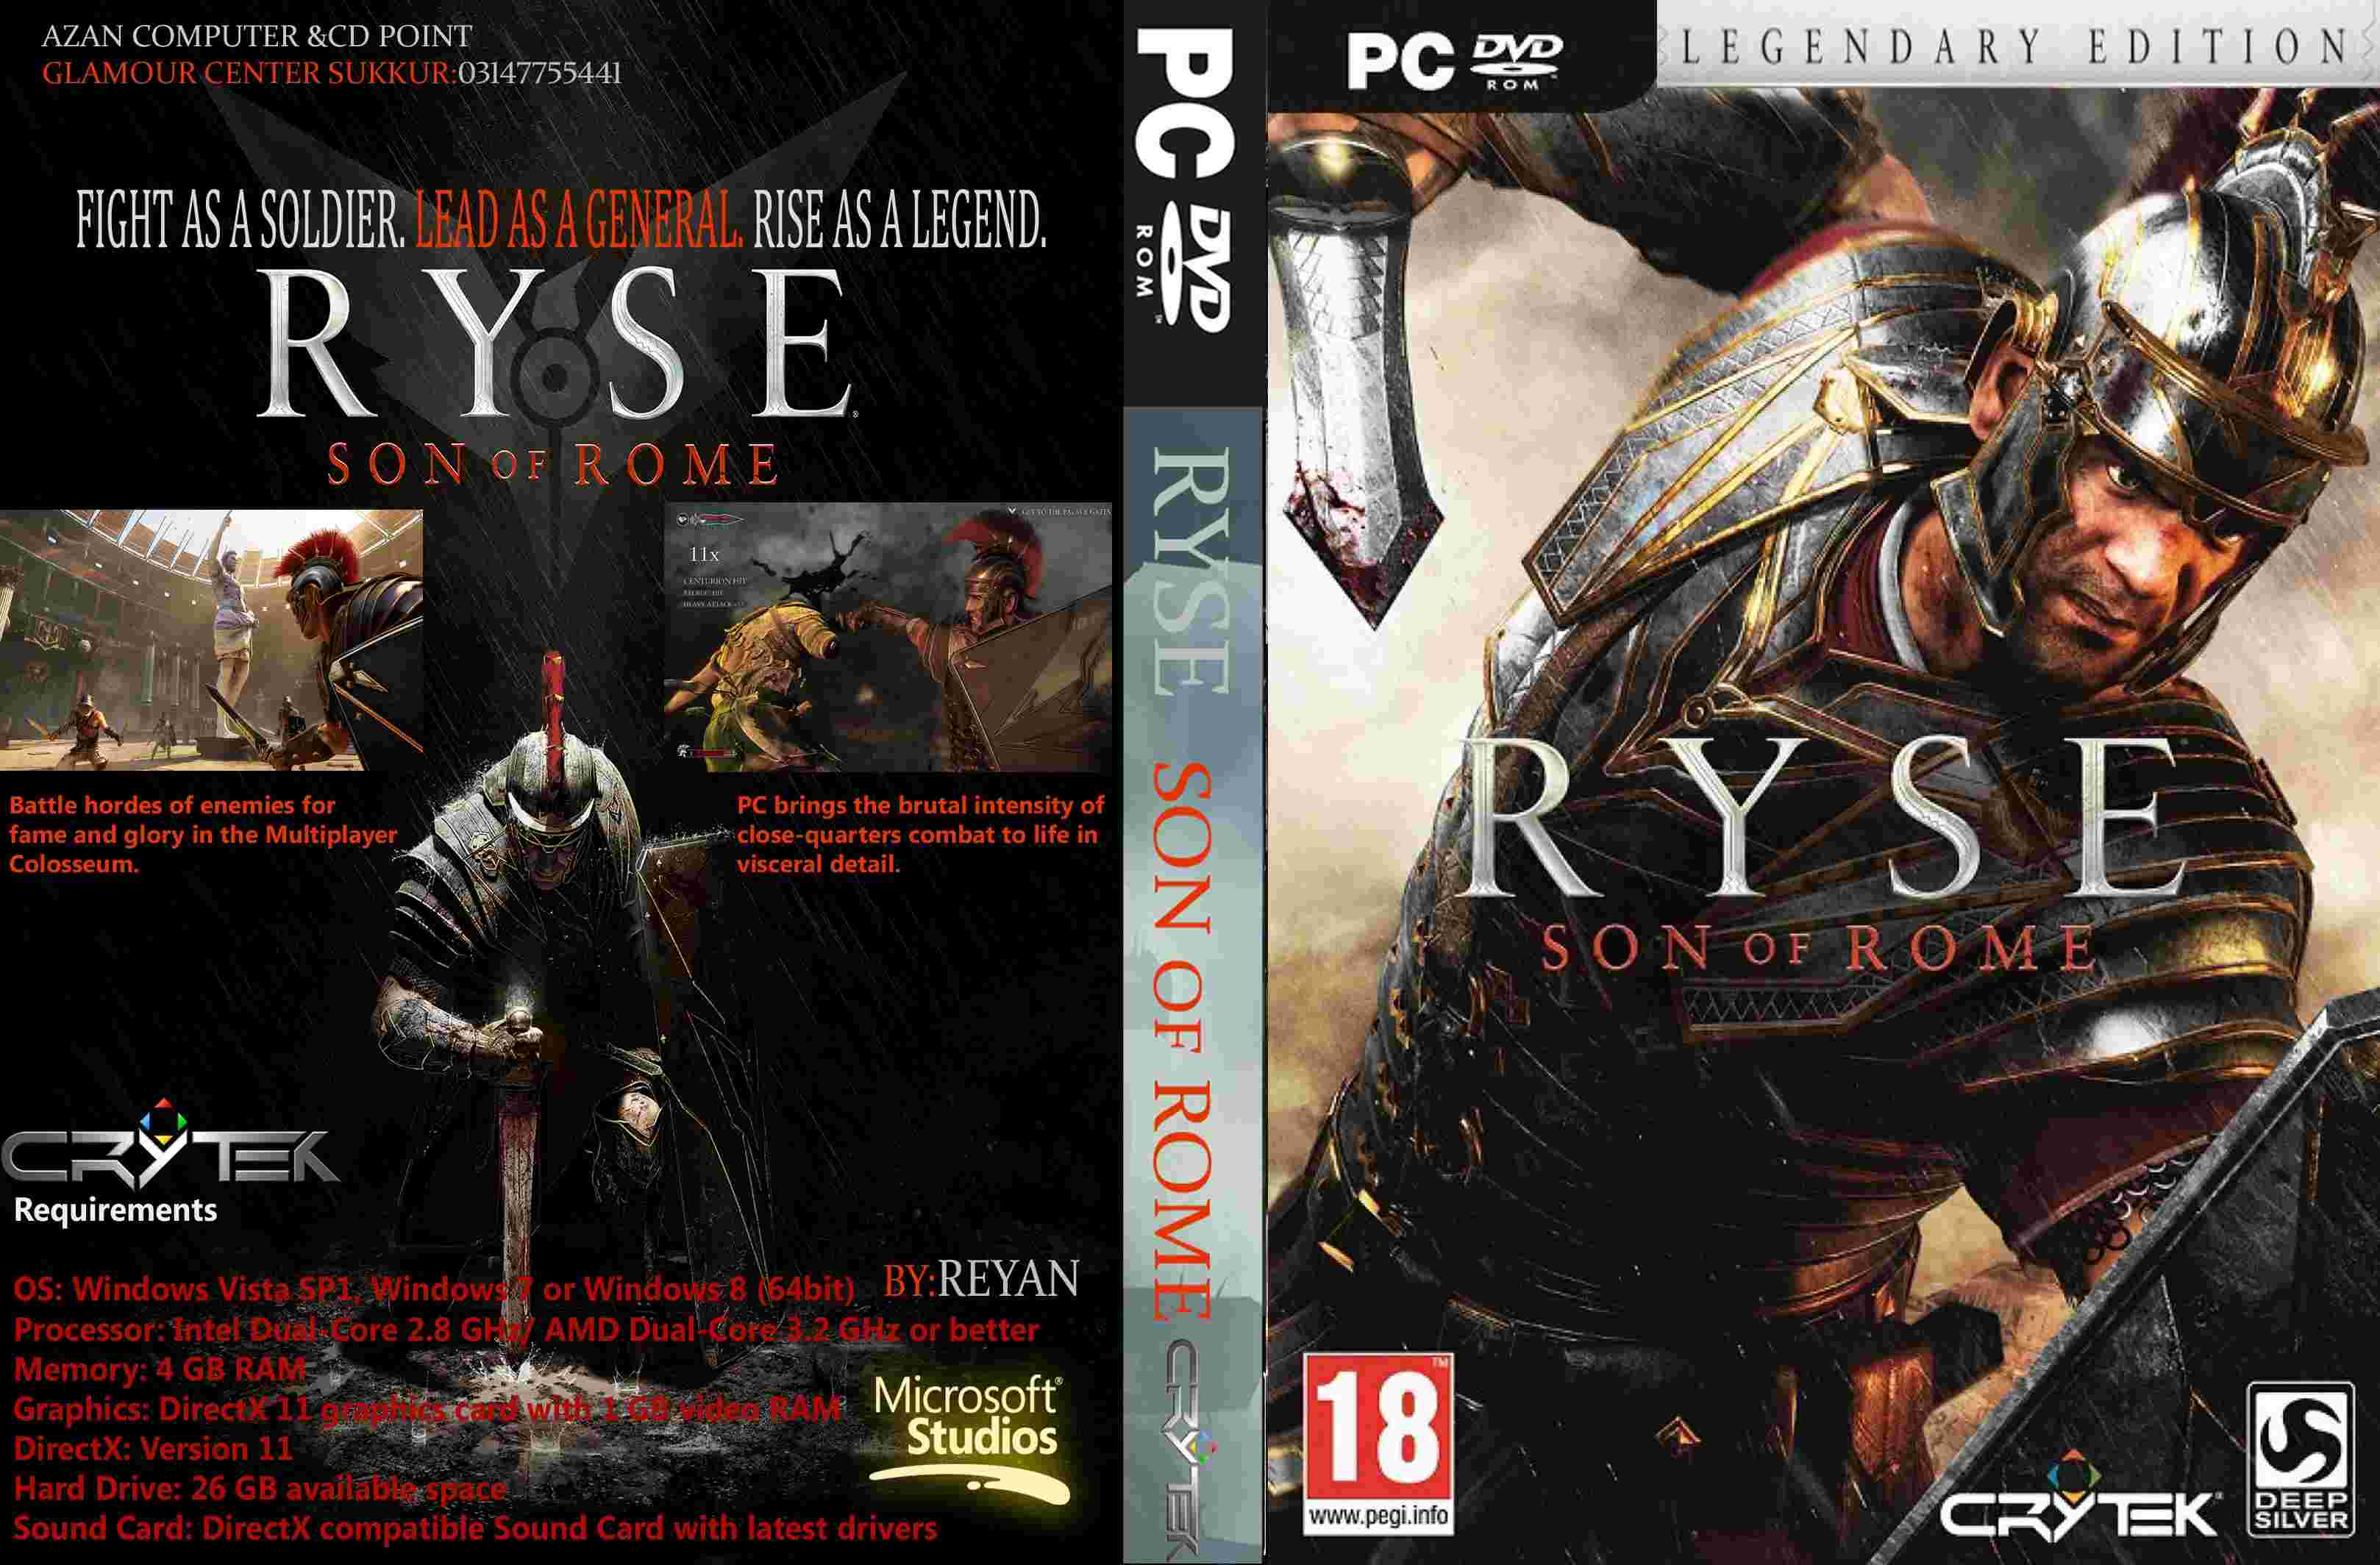 Ryse son of rome on steam фото 29